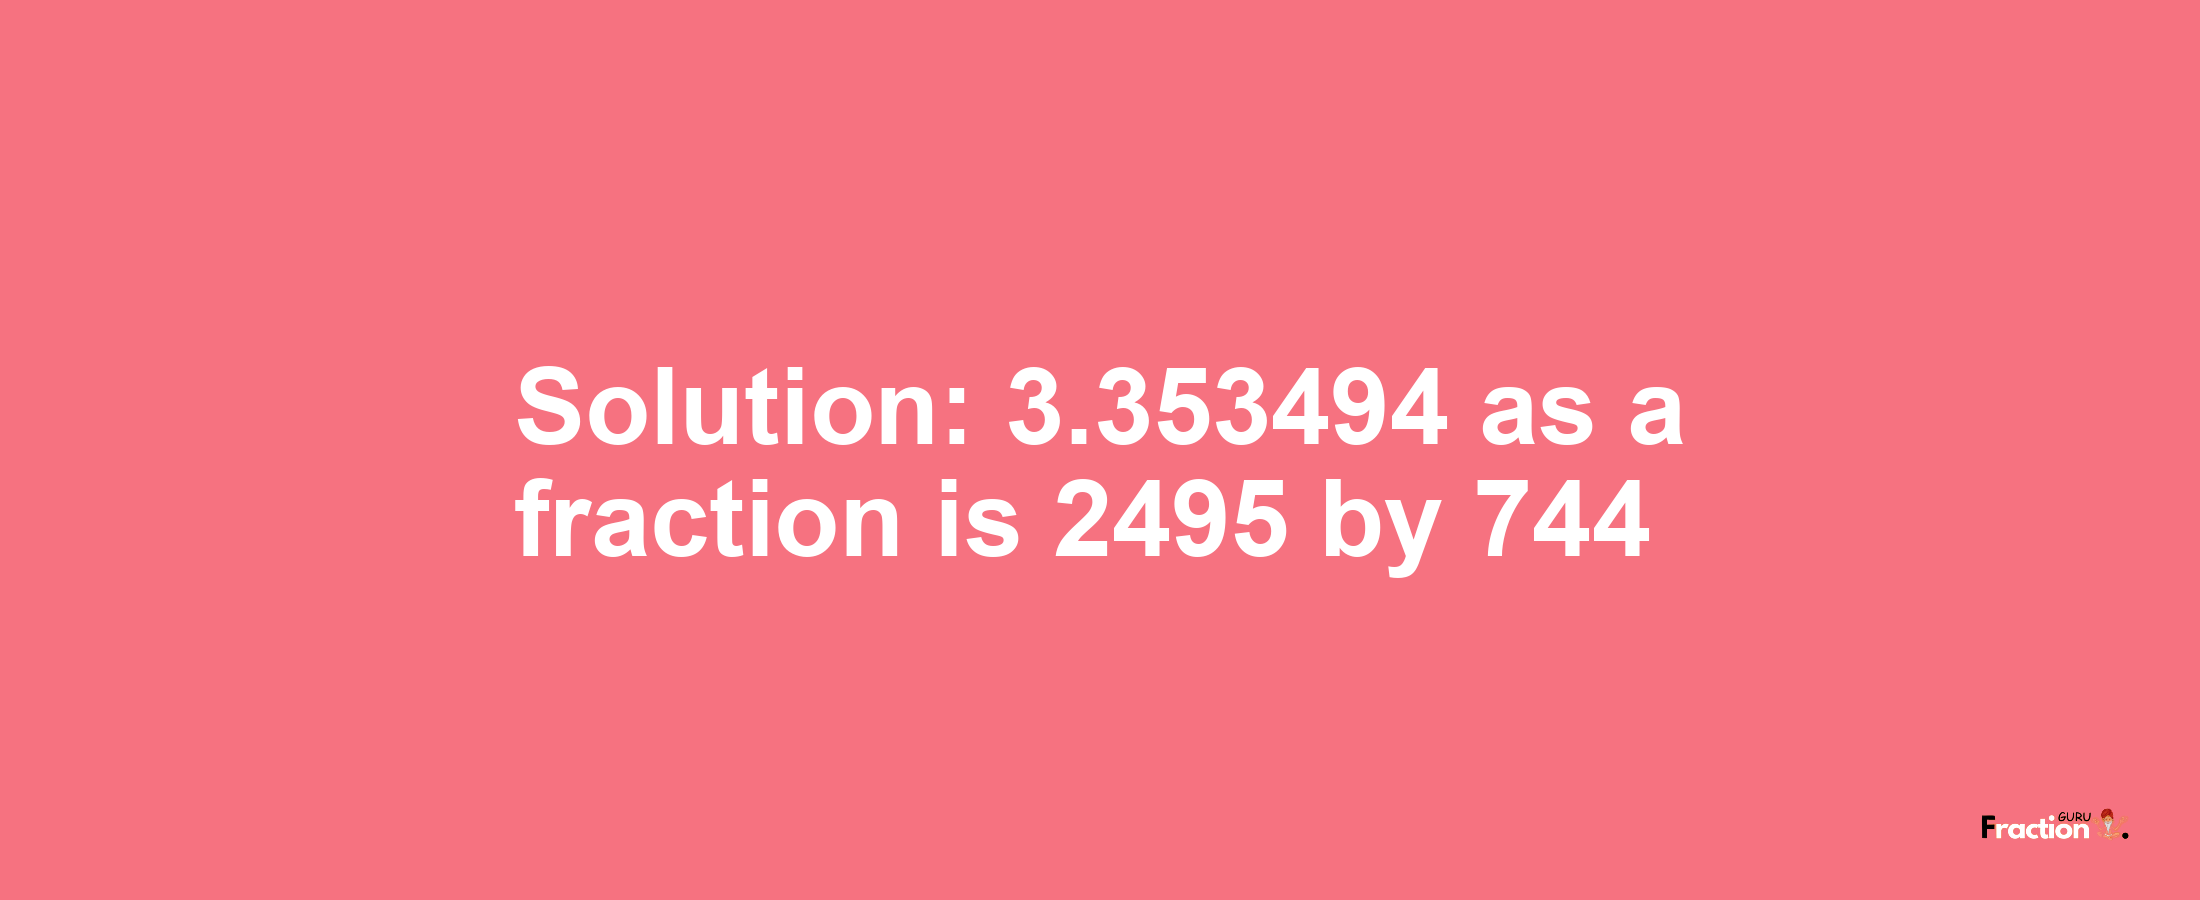 Solution:3.353494 as a fraction is 2495/744